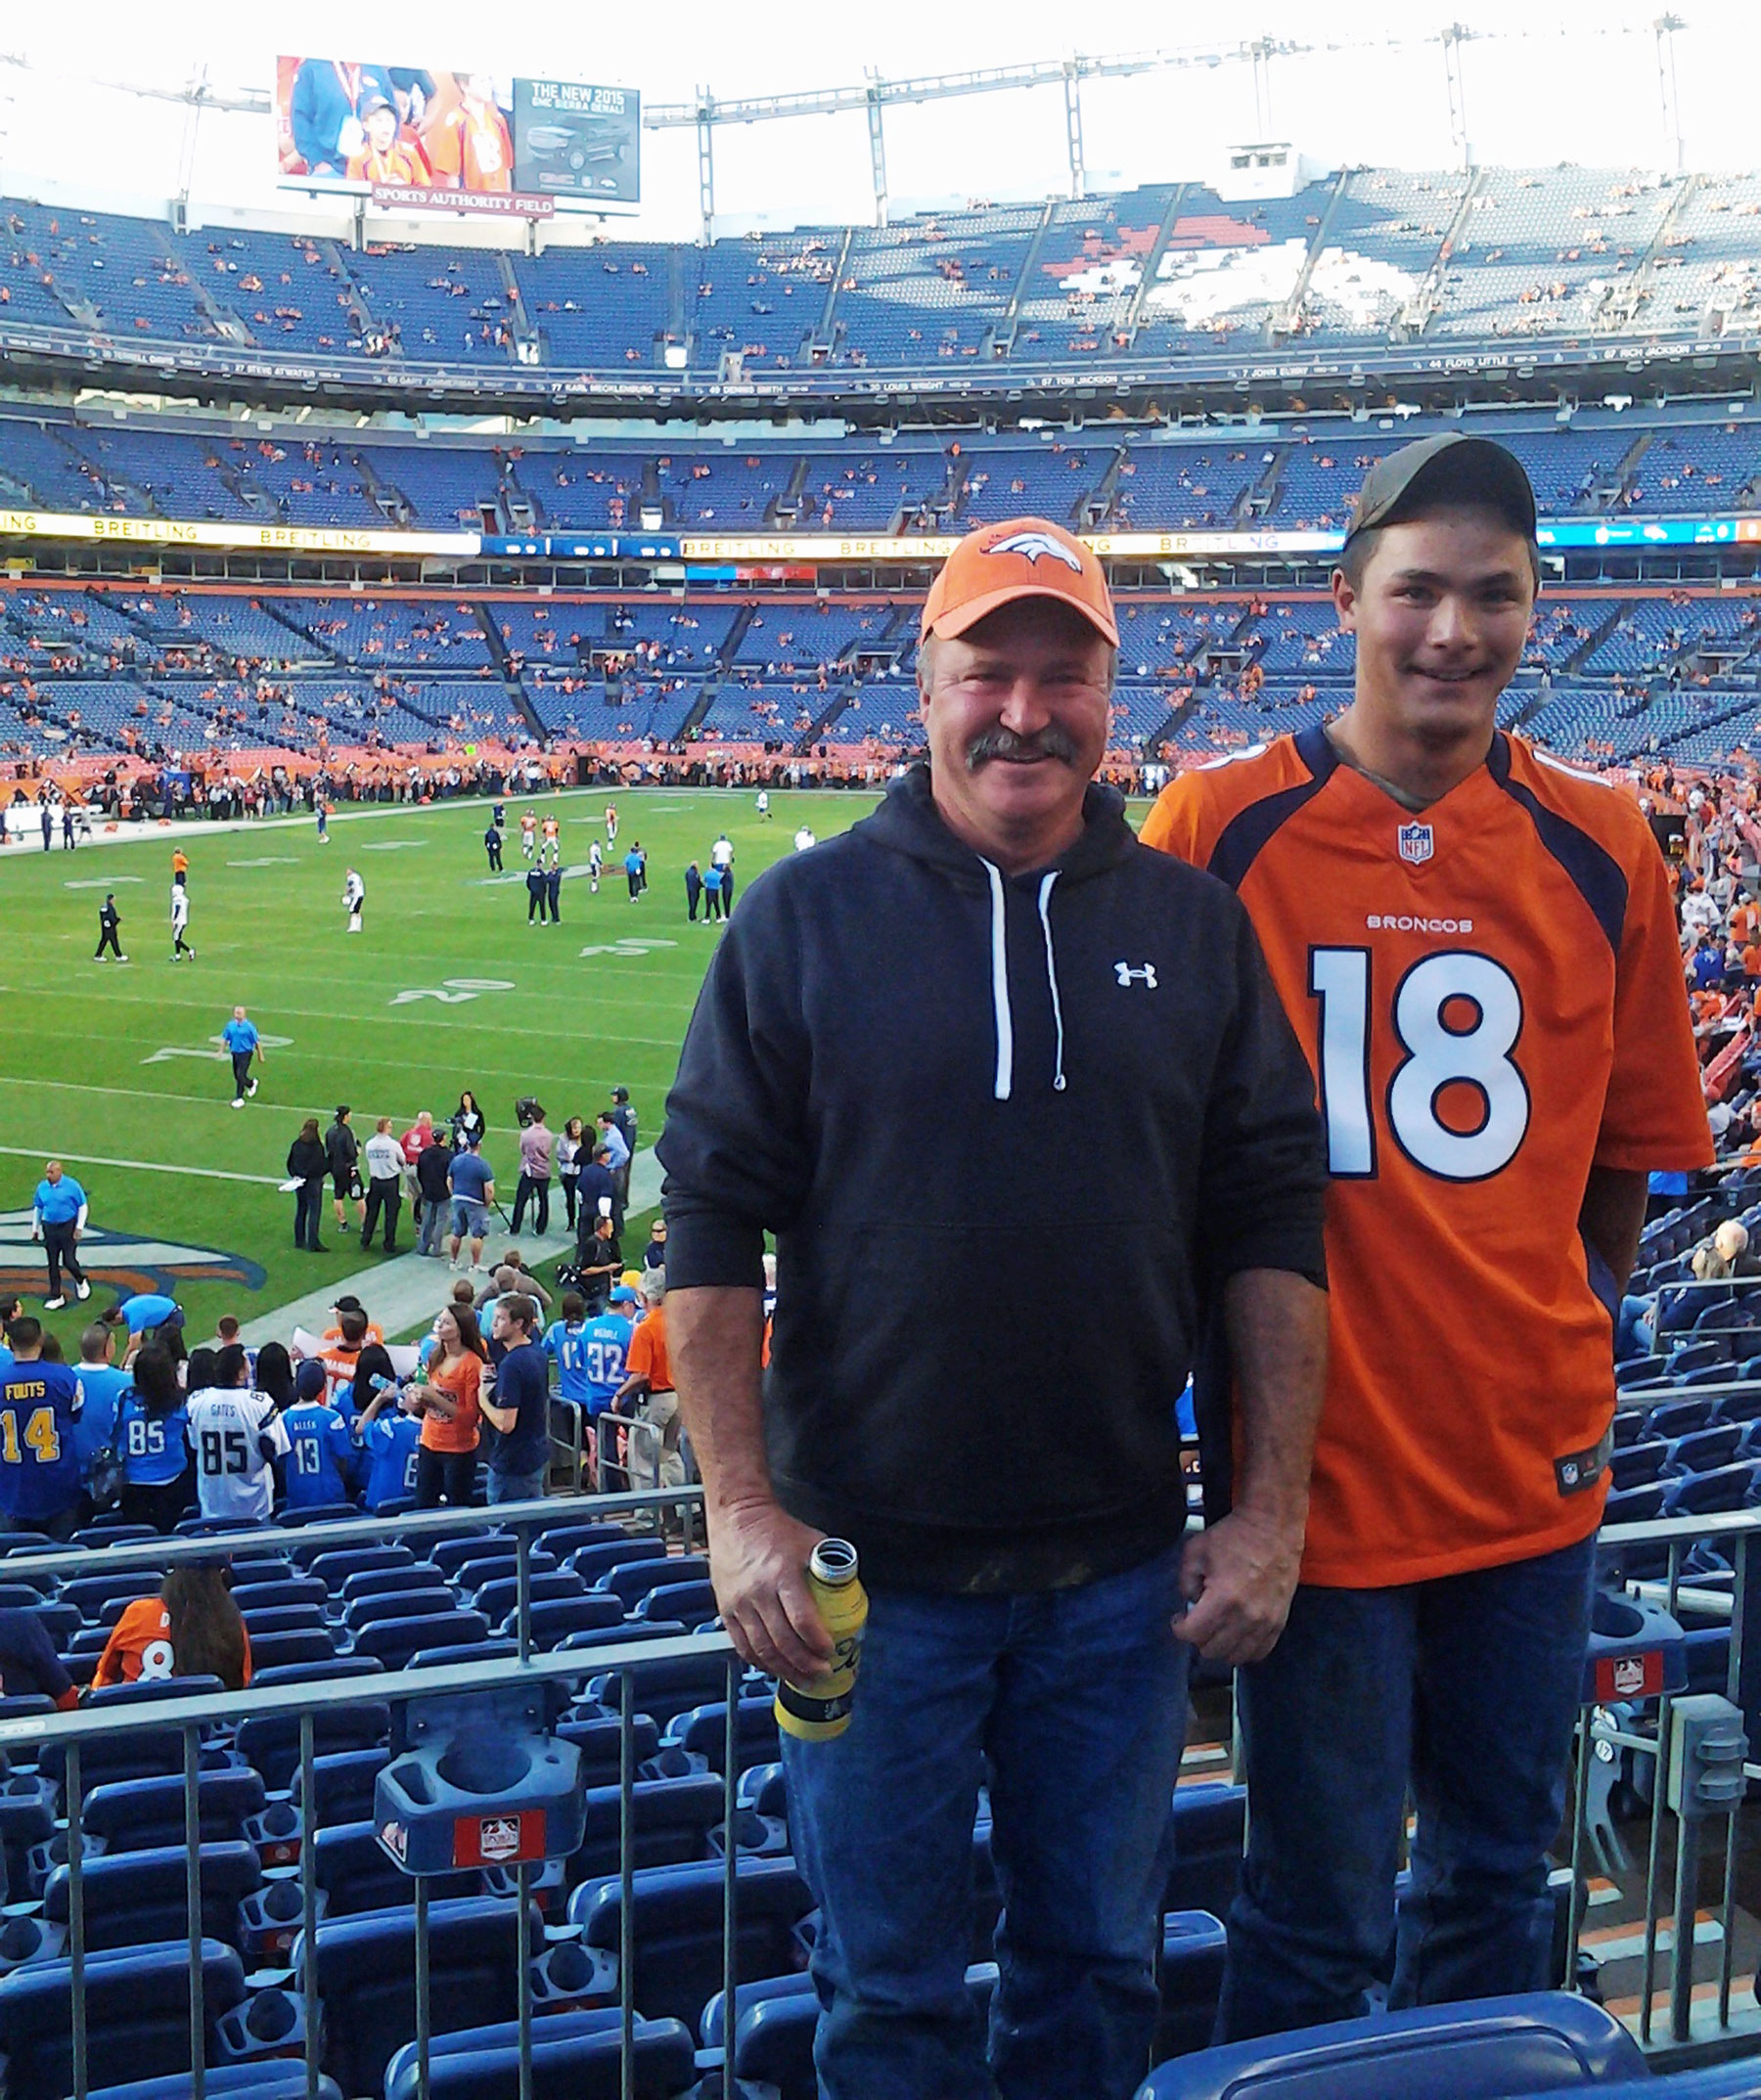 Man who disappeared from Broncos football game found safe